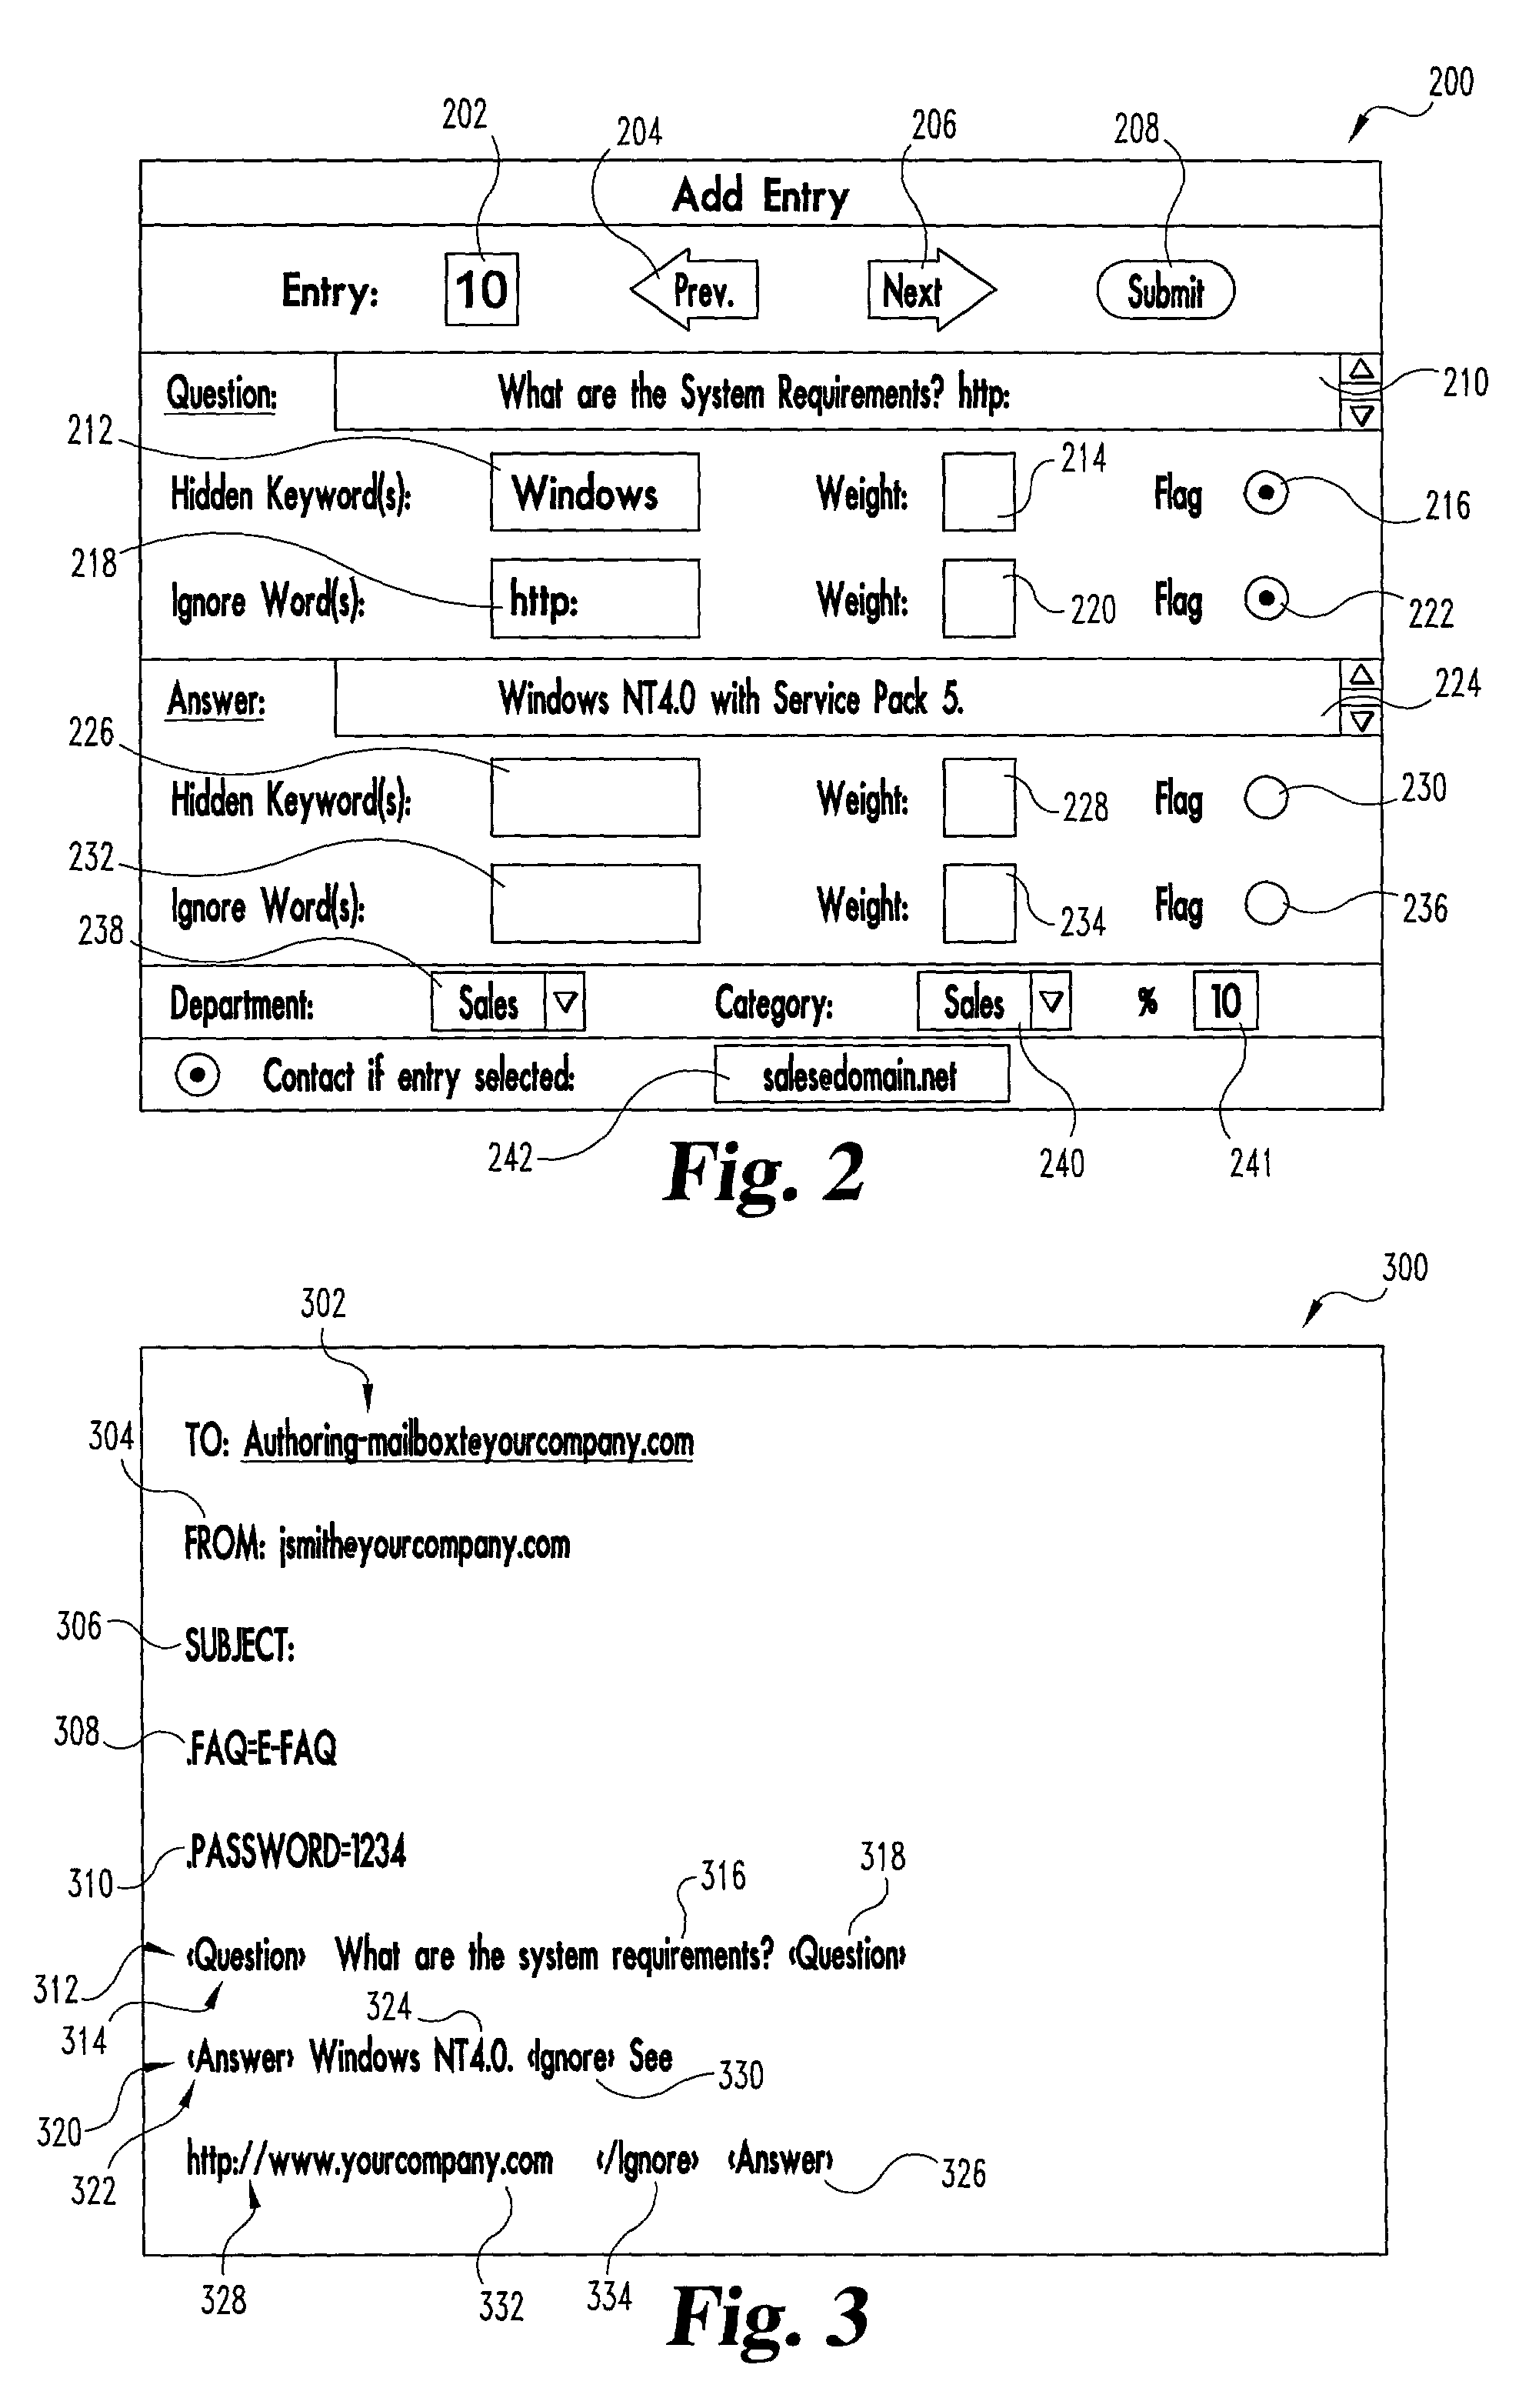 Knowledge-base system and method